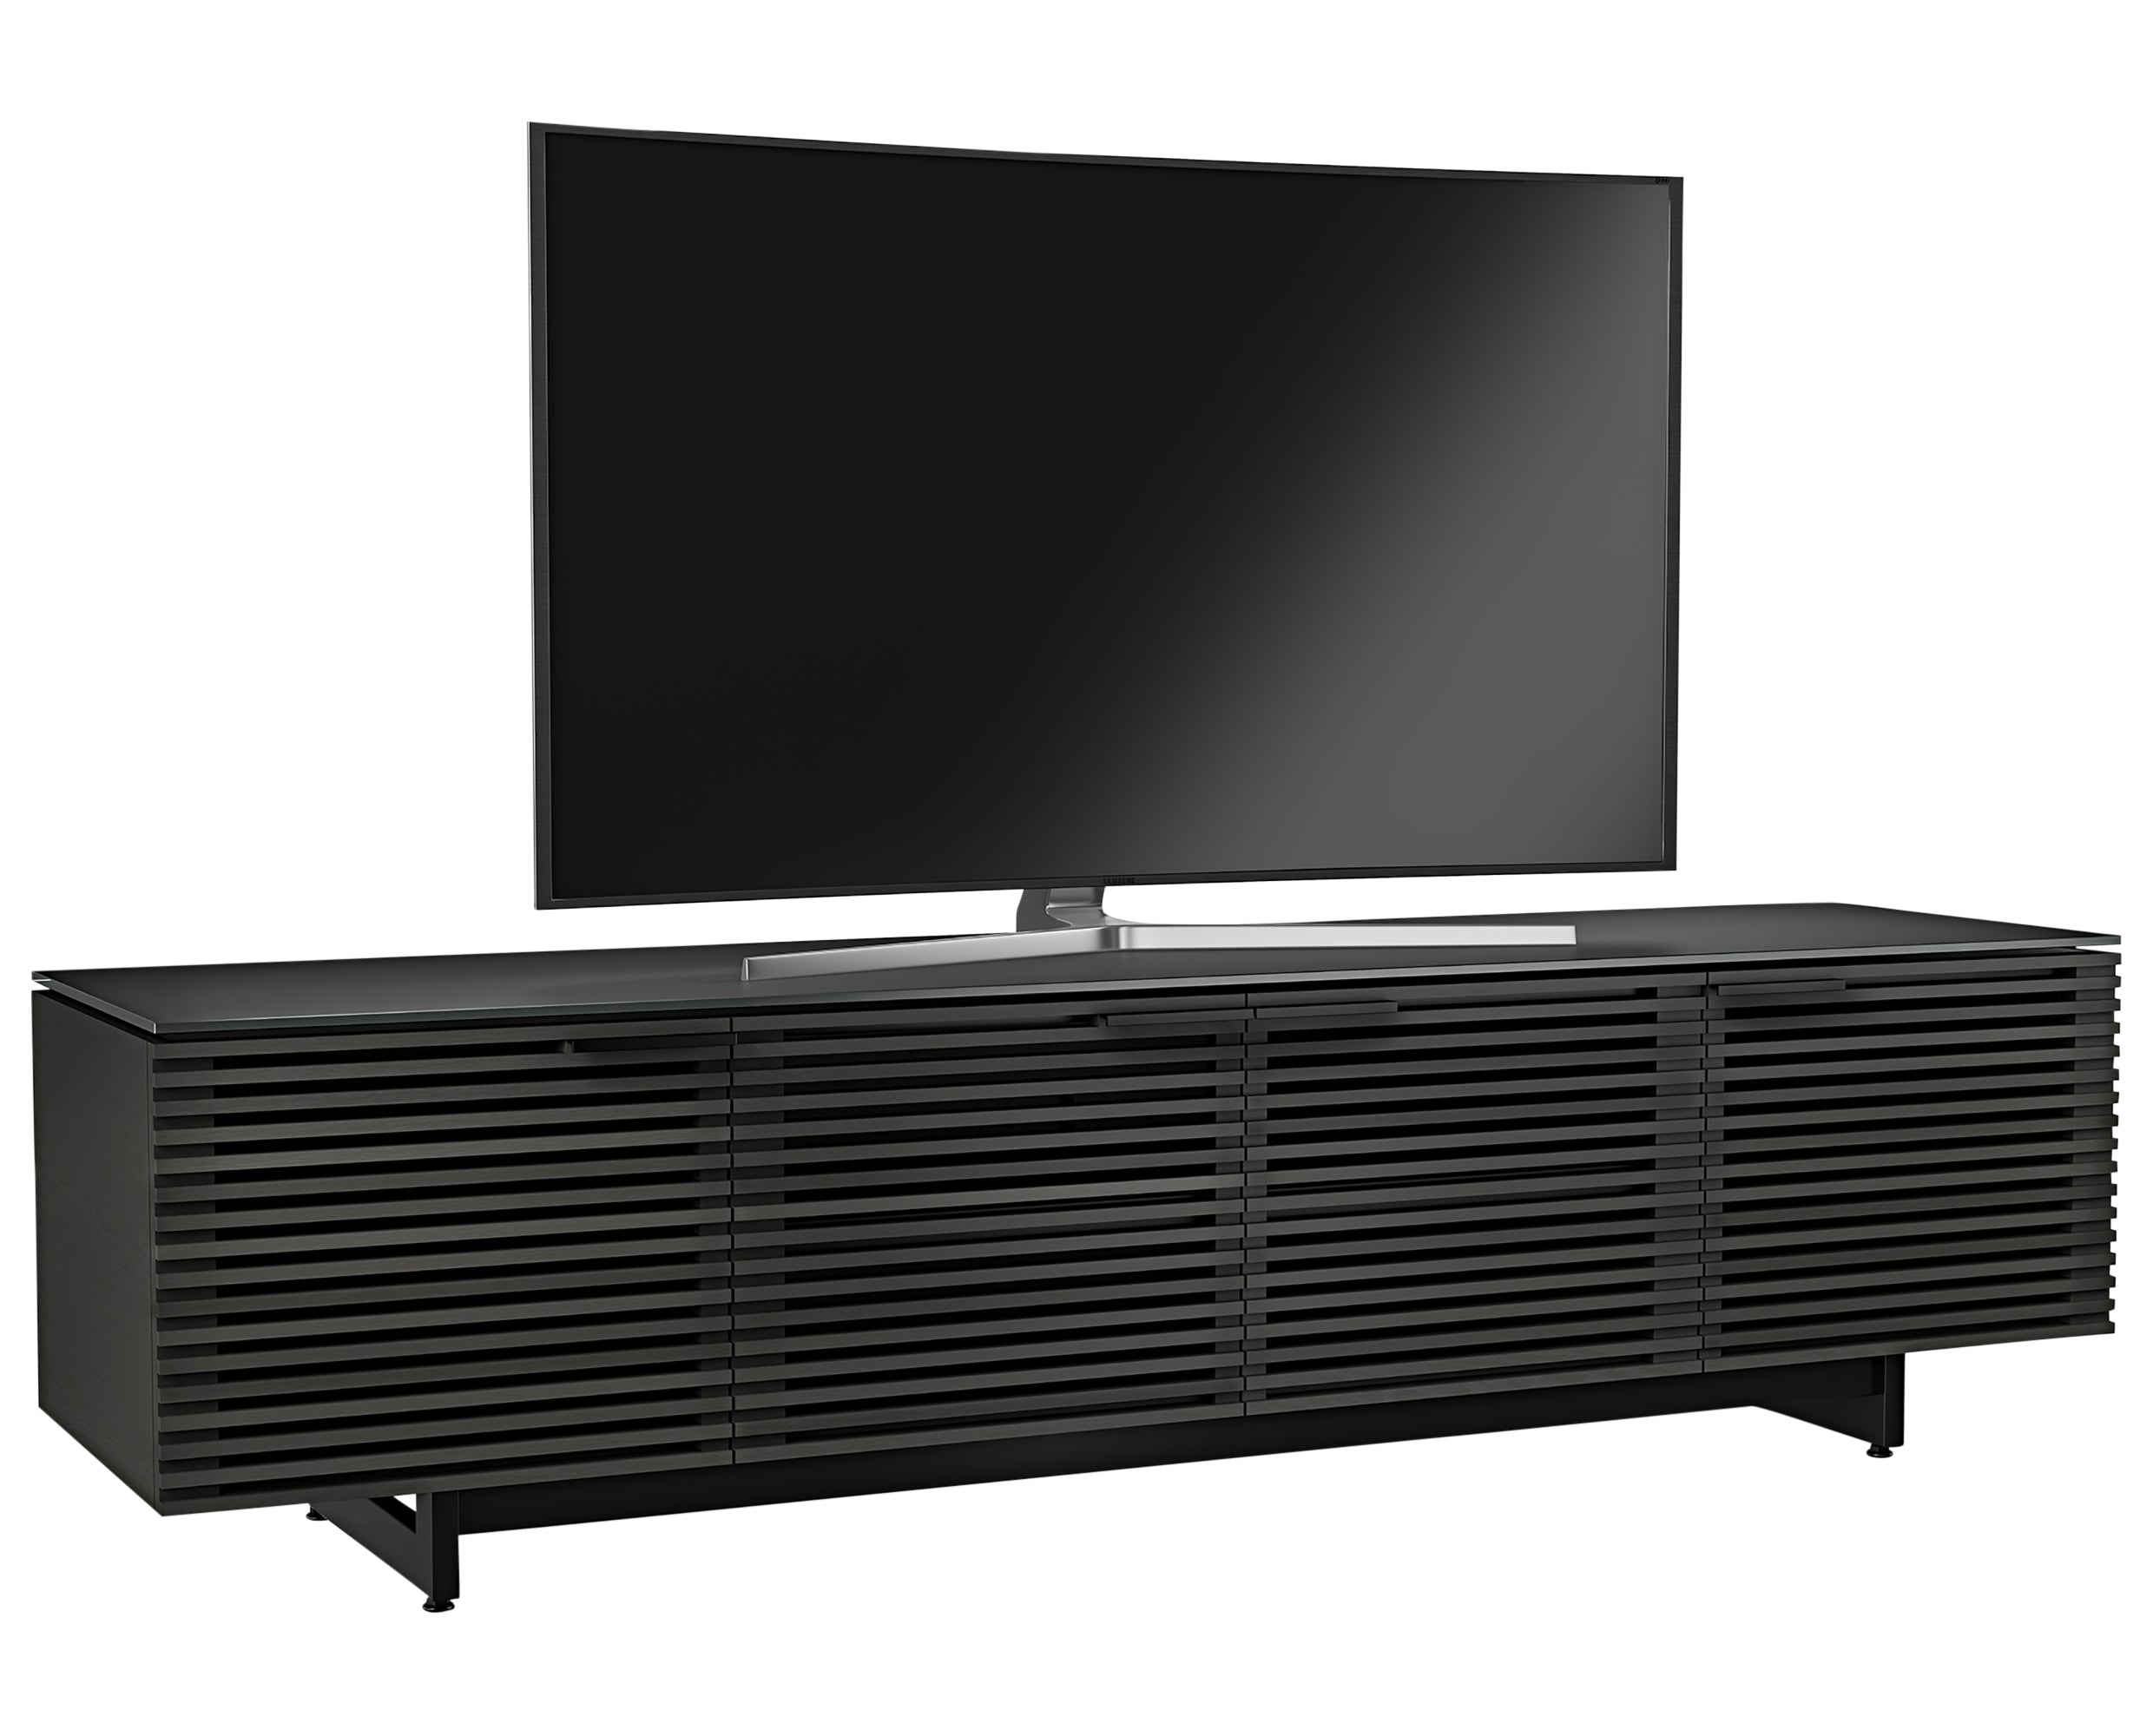 Charcoal Stained Ash &amp; Charcoal Ash Veneer with Black Satin-Etched Glass &amp; Black Steel | BDI Corridor Low Profile TV Stand | Valley Ridge Furniture